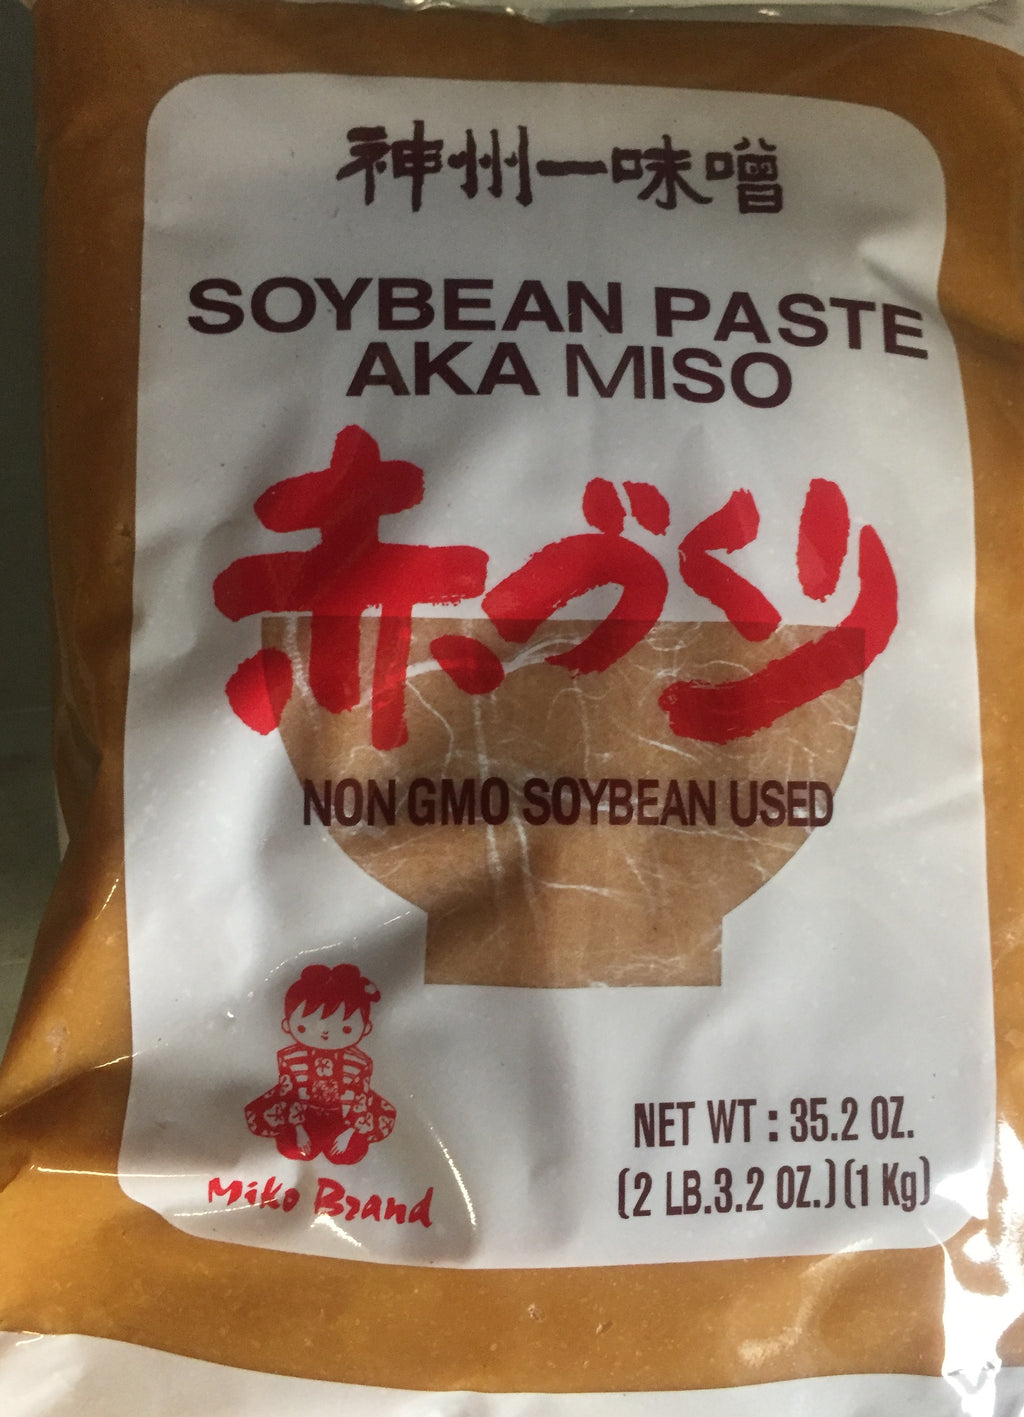 Red Miso Paste Marukome 1kg Packet